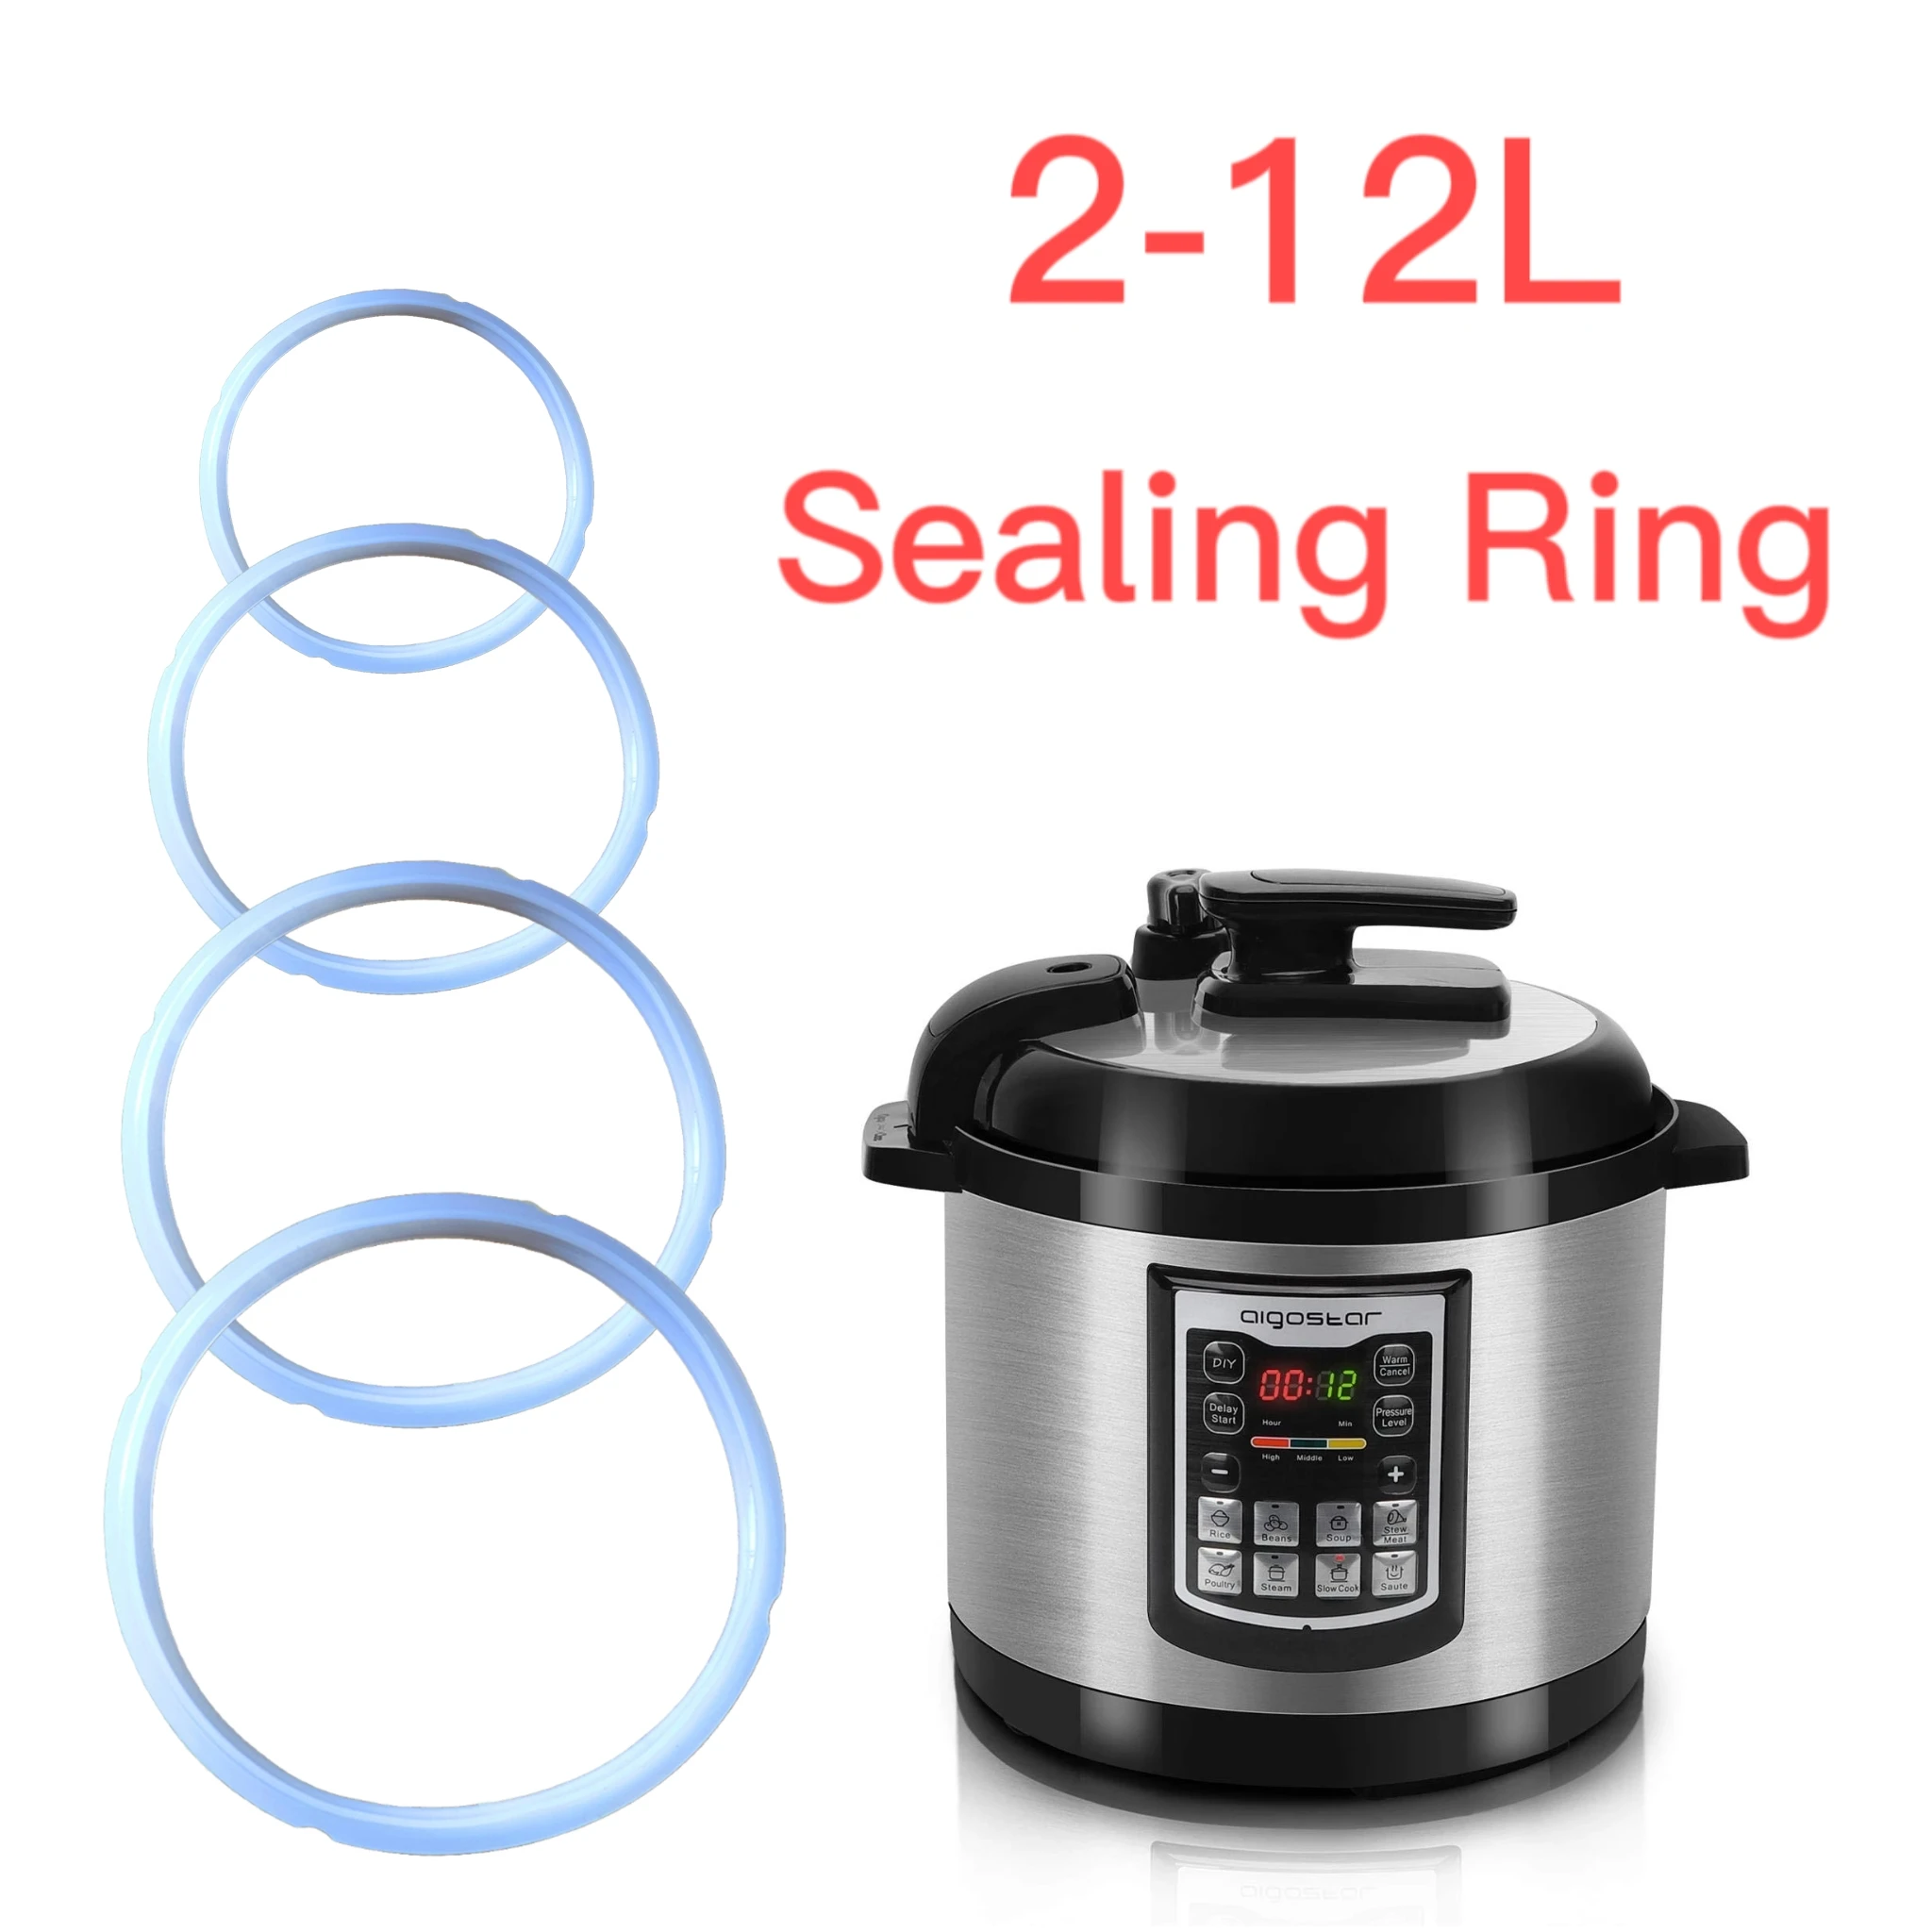 Pressure Cooker Gaskets Silicone Sealing Rings and Universal Replacement  Floater and Sealer for 5 or 6 Quart Models -Set of 7